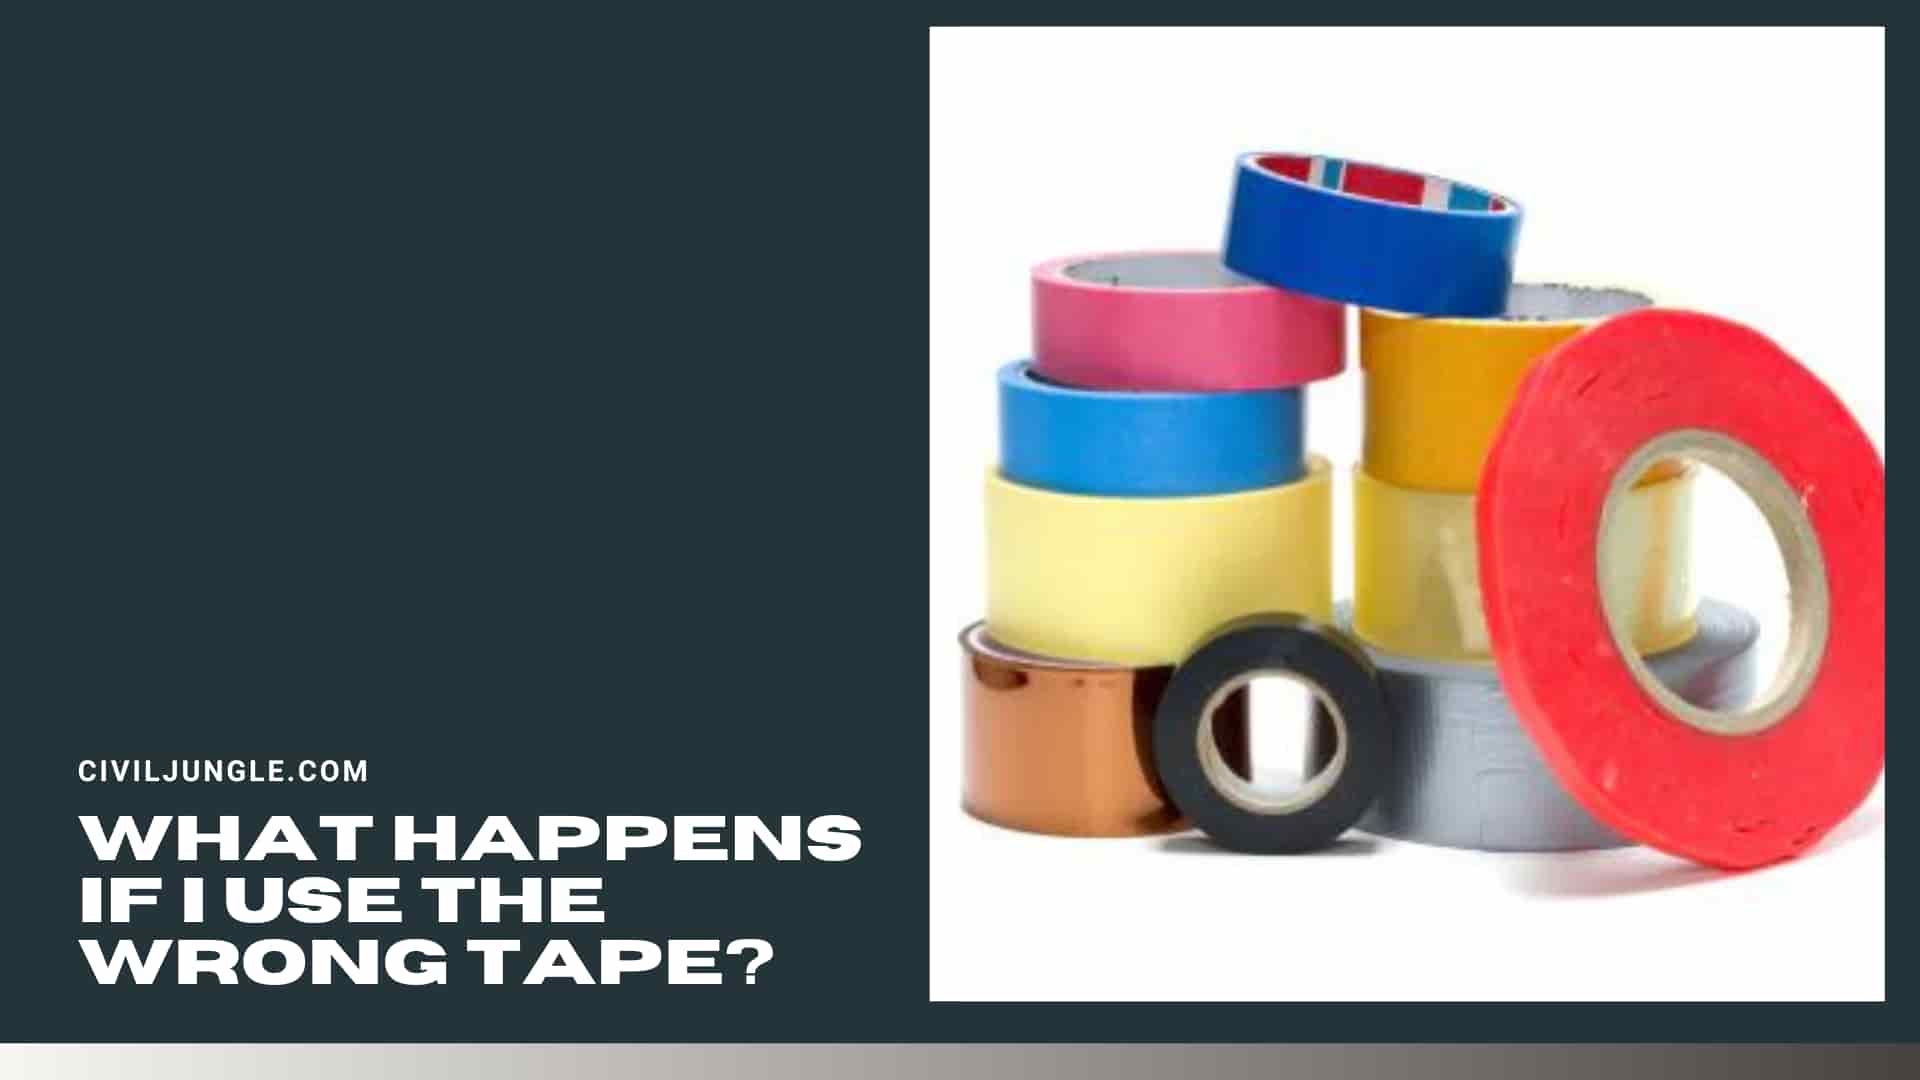 What Happens If I Use the Wrong Tape?